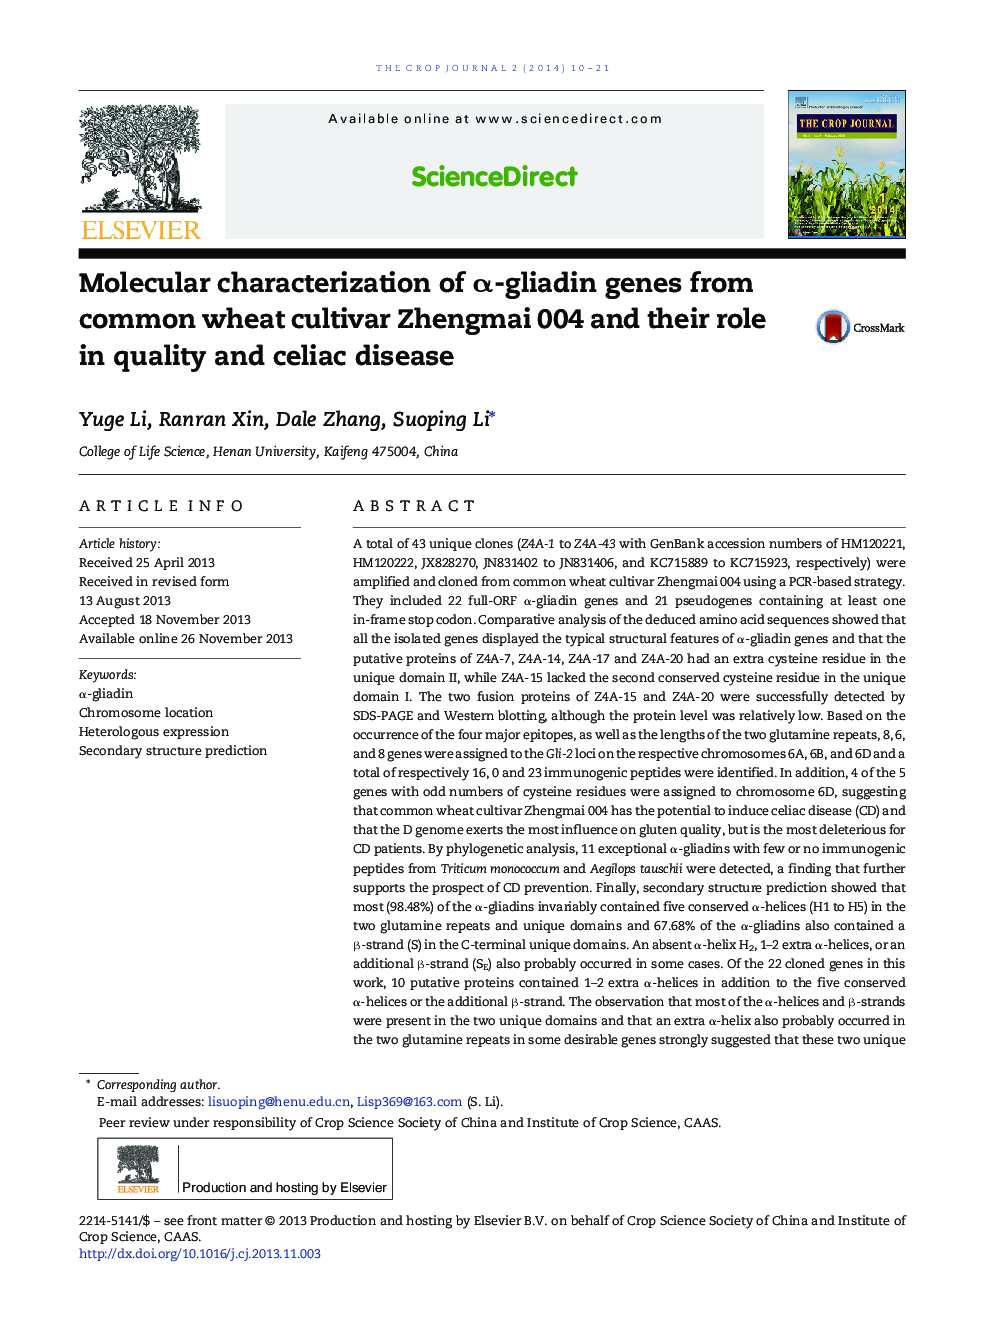 Molecular characterization of α-gliadin genes from common wheat cultivar Zhengmai 004 and their role in quality and celiac disease 